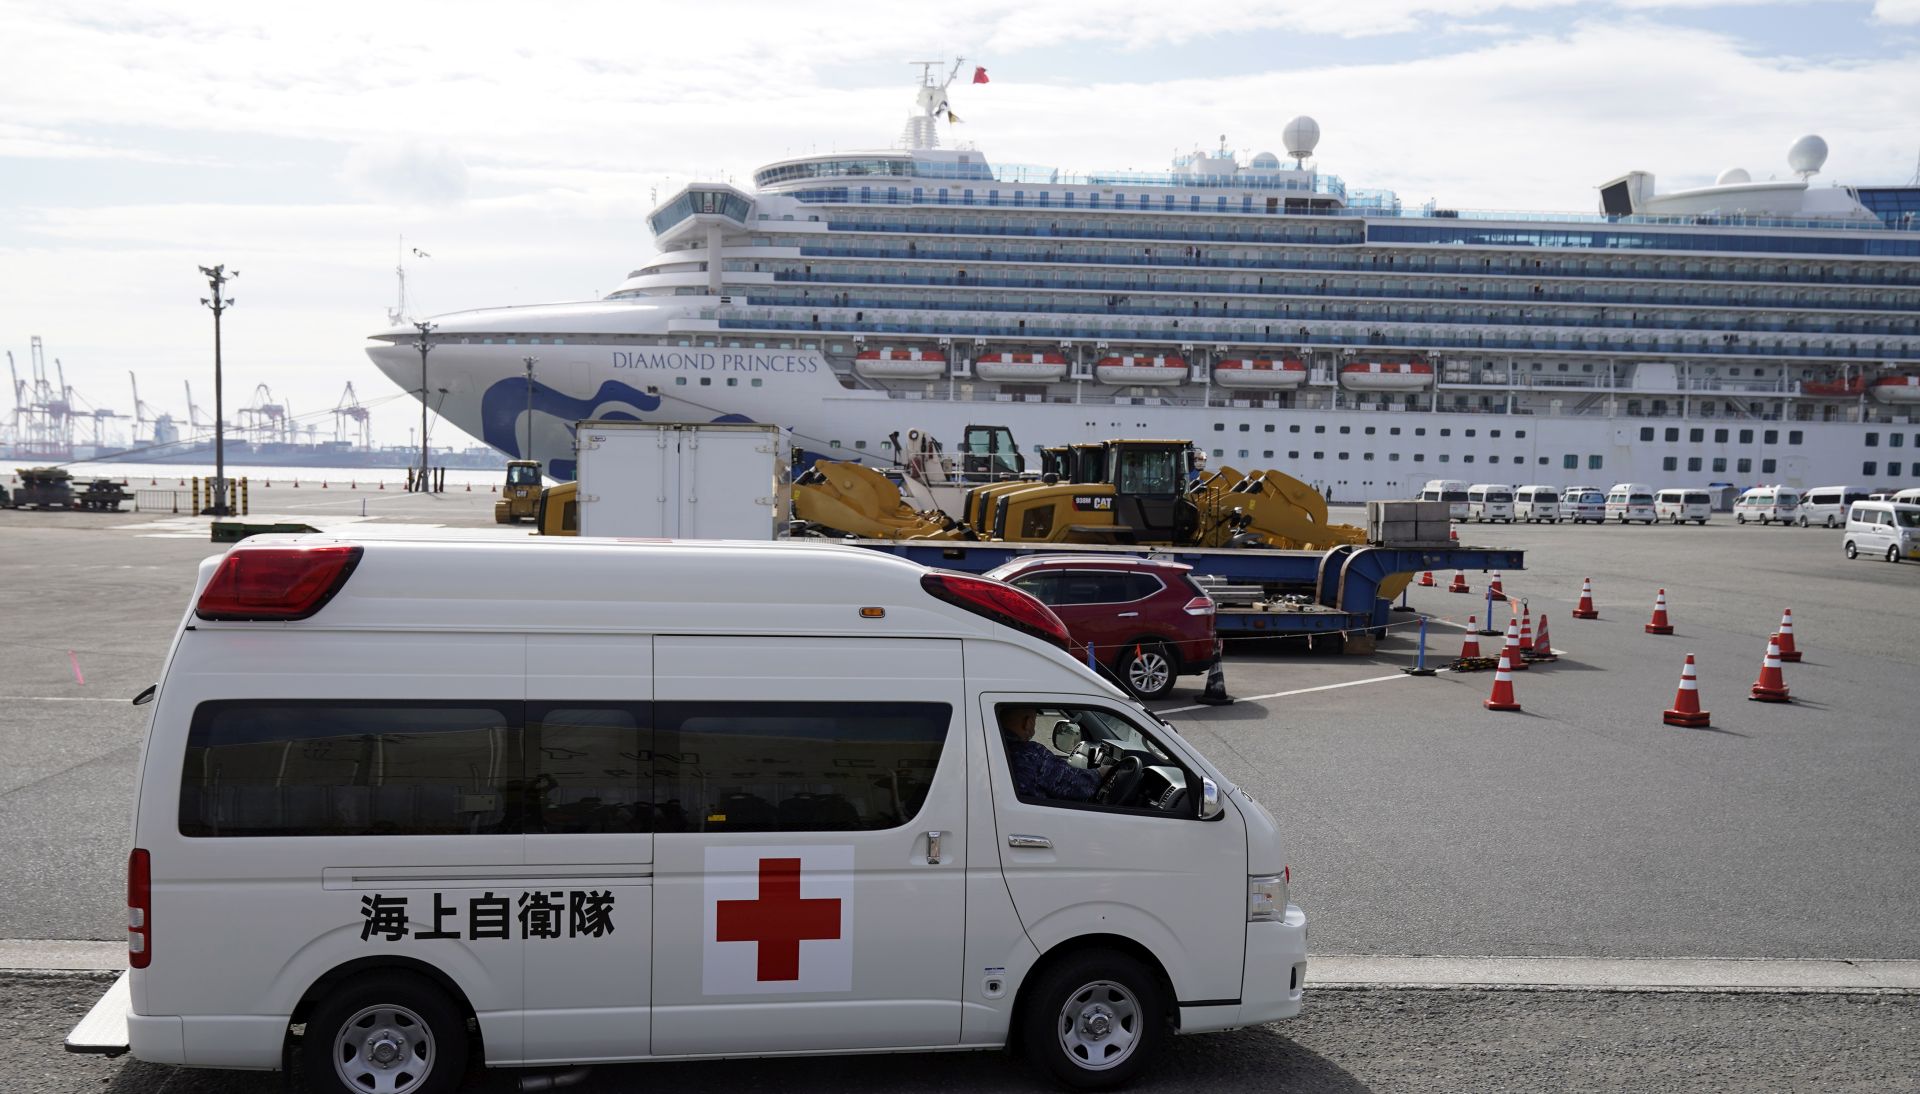 epa08212430 An ambulance arrives at the Daikoku Pier Cruise Terminal where the Diamond Princess cruise ship is docked in Yokohama, south of Tokyo, Japan, 12 February 2020. According to latest media reports, 174 passengers of the Diamond Princess cruise ship have been tested positive for the Covid-19, raising the number of infections to 203 in Japan. The disease caused by the novel coronavirus (SARS-CoV-2) has been officially named Covid-19 by the World Health Organization (WHO). The outbreak, which originated in the Chinese city of Wuhan, has so far killed at least 1,115 people and infected over 45,000 others worldwide, mostly in China.  EPA/FRANCK ROBICHON